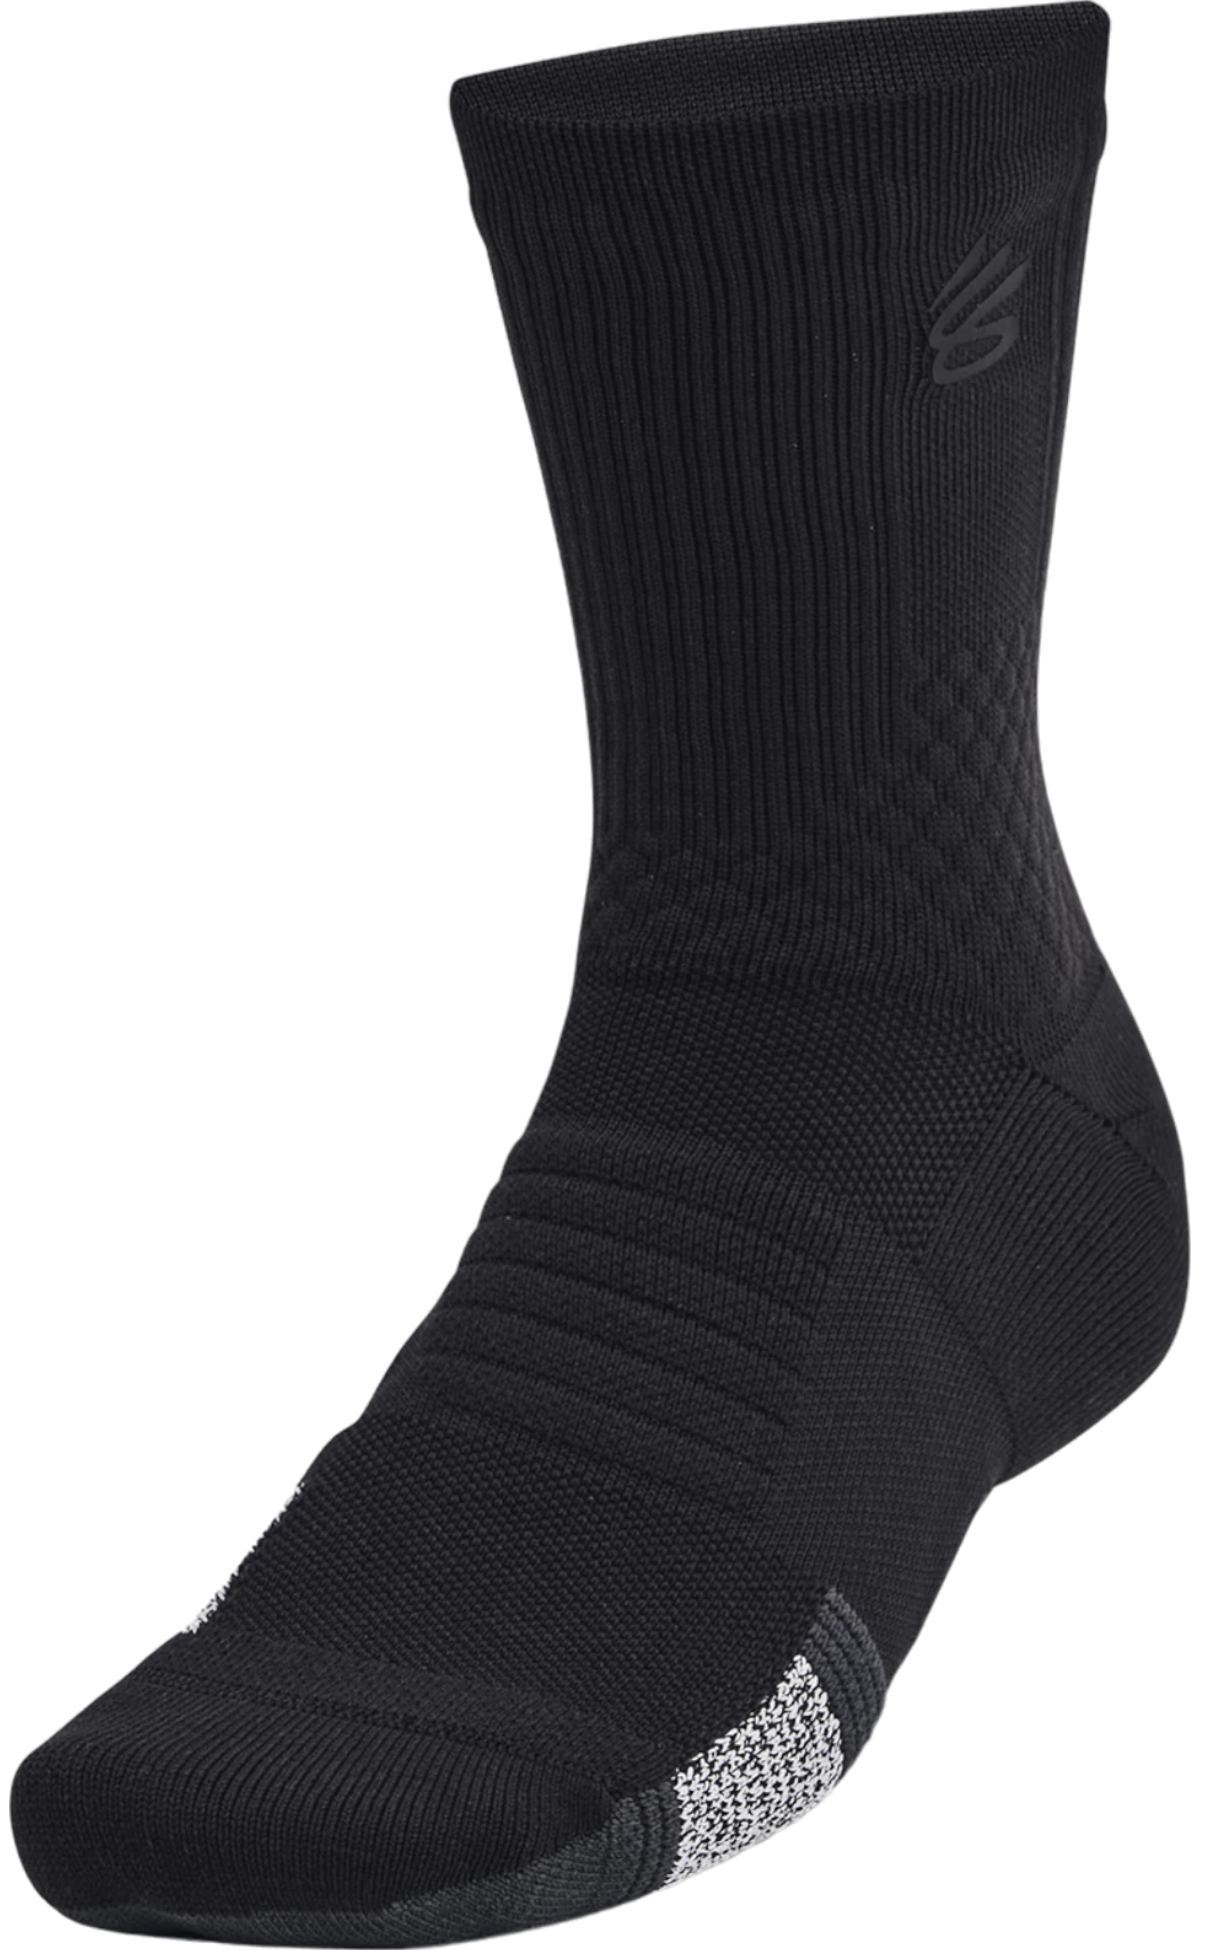 Curry ArmourDry™ Playmaker Mid-Crew Socks